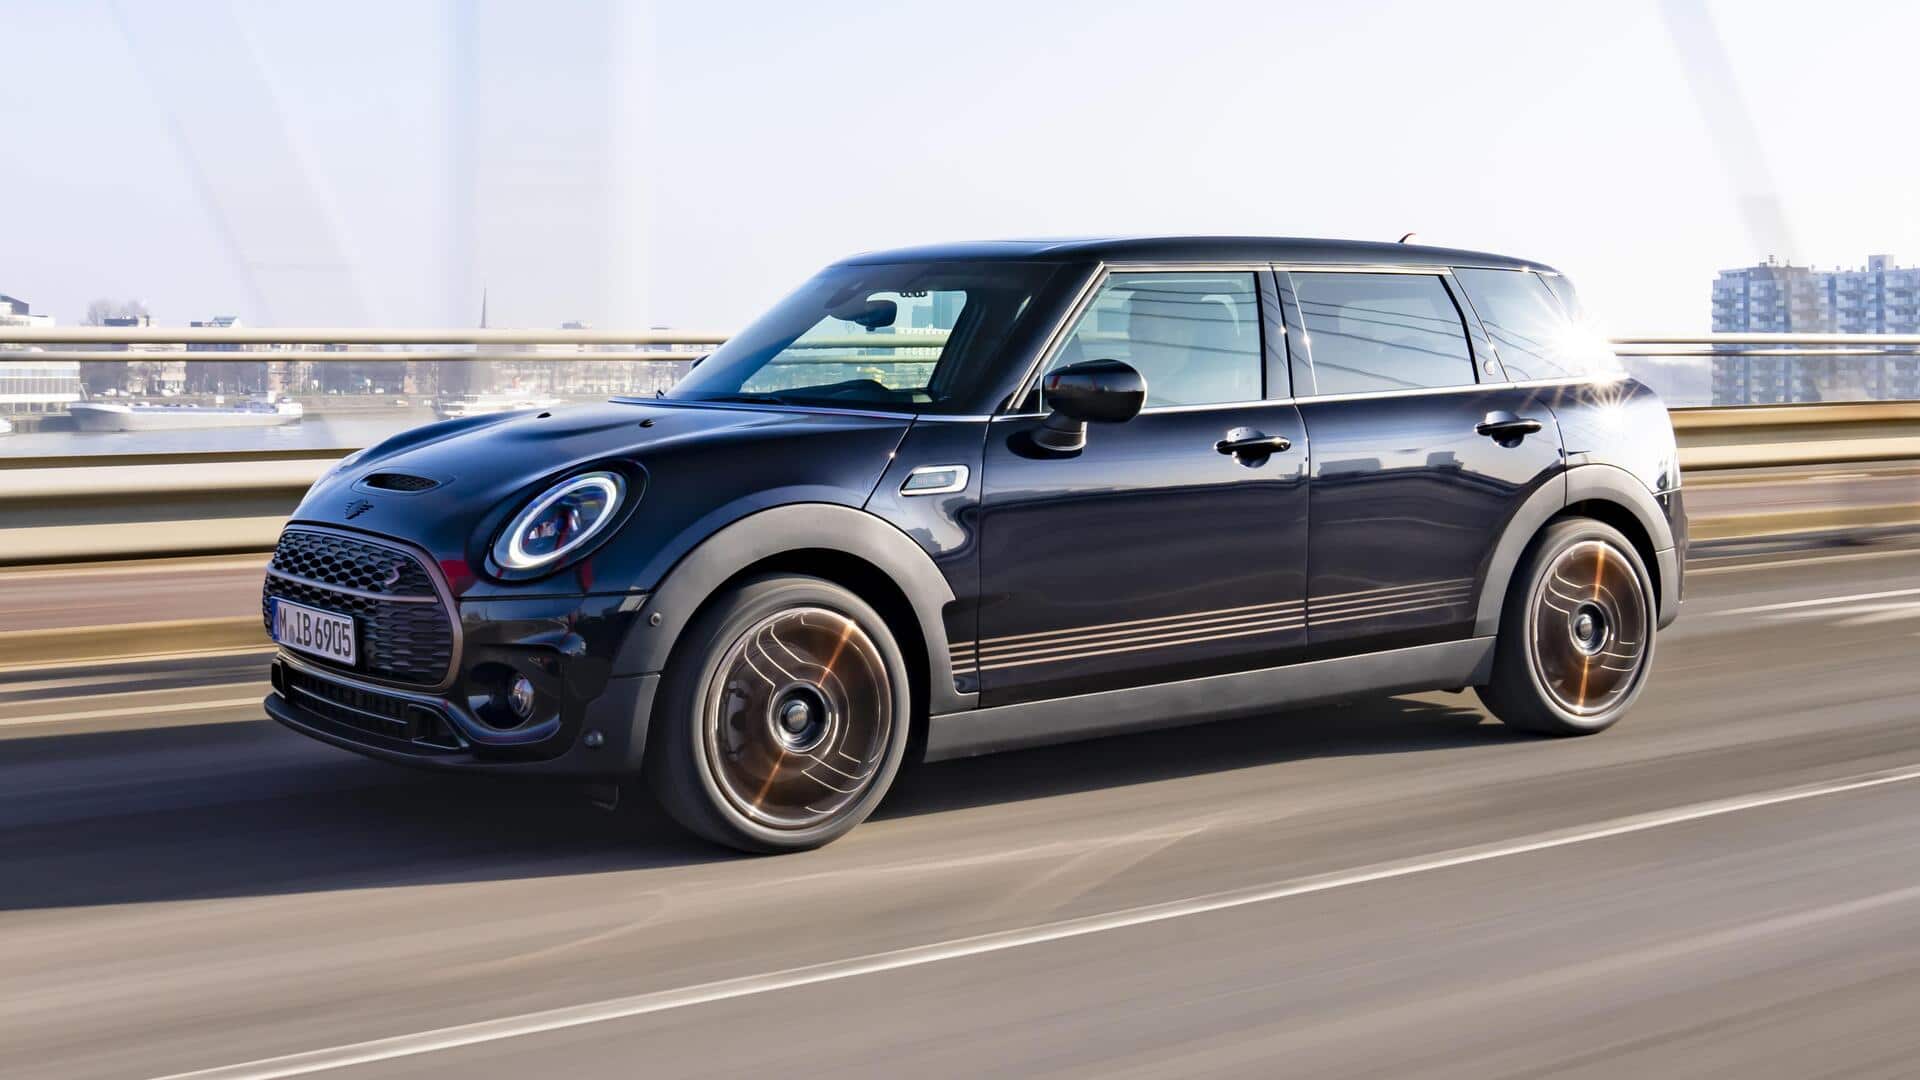 MINI ends production of Clubman hatchback after 17 years